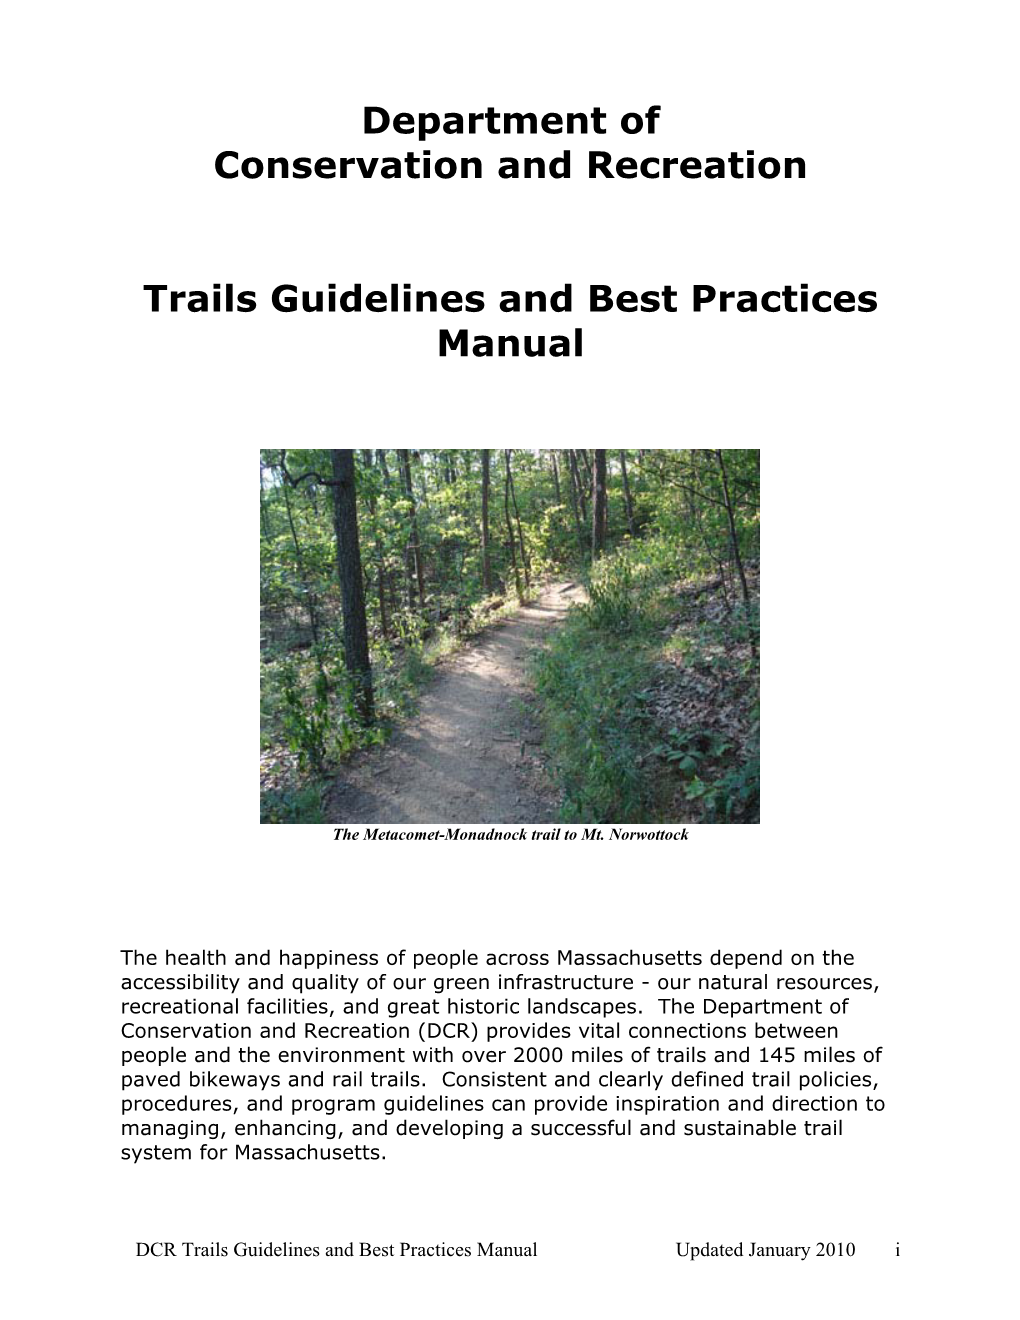 Department of Conservation and Recreation Trails Guidelines And